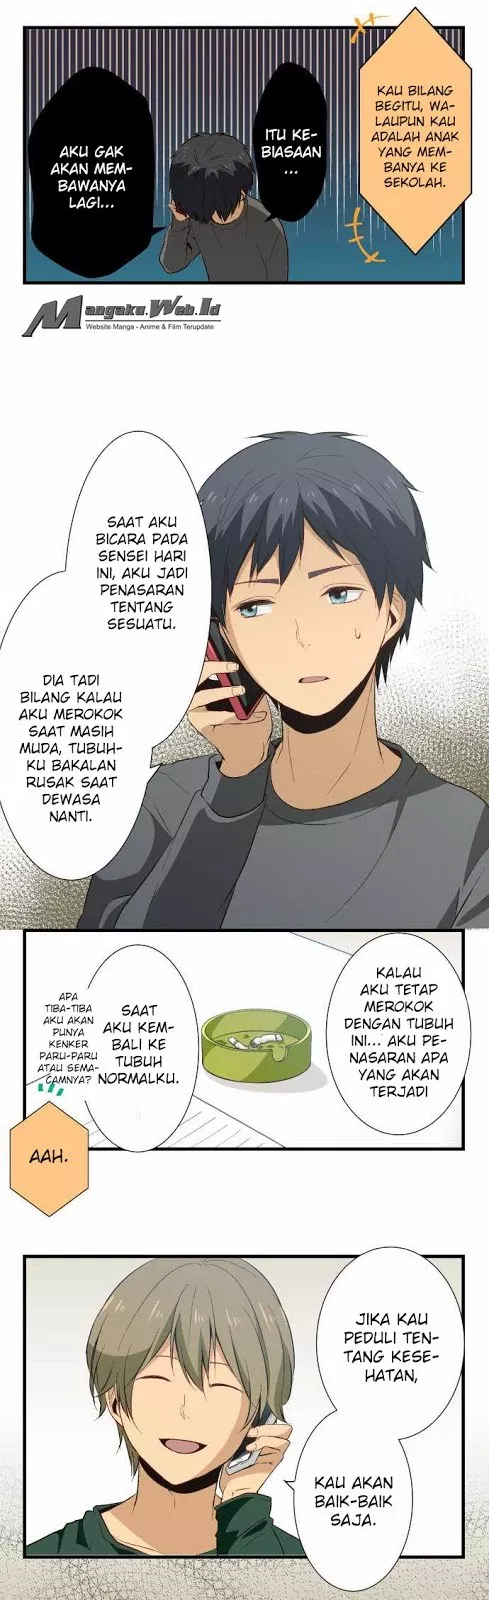 ReLIFE Chapter 19